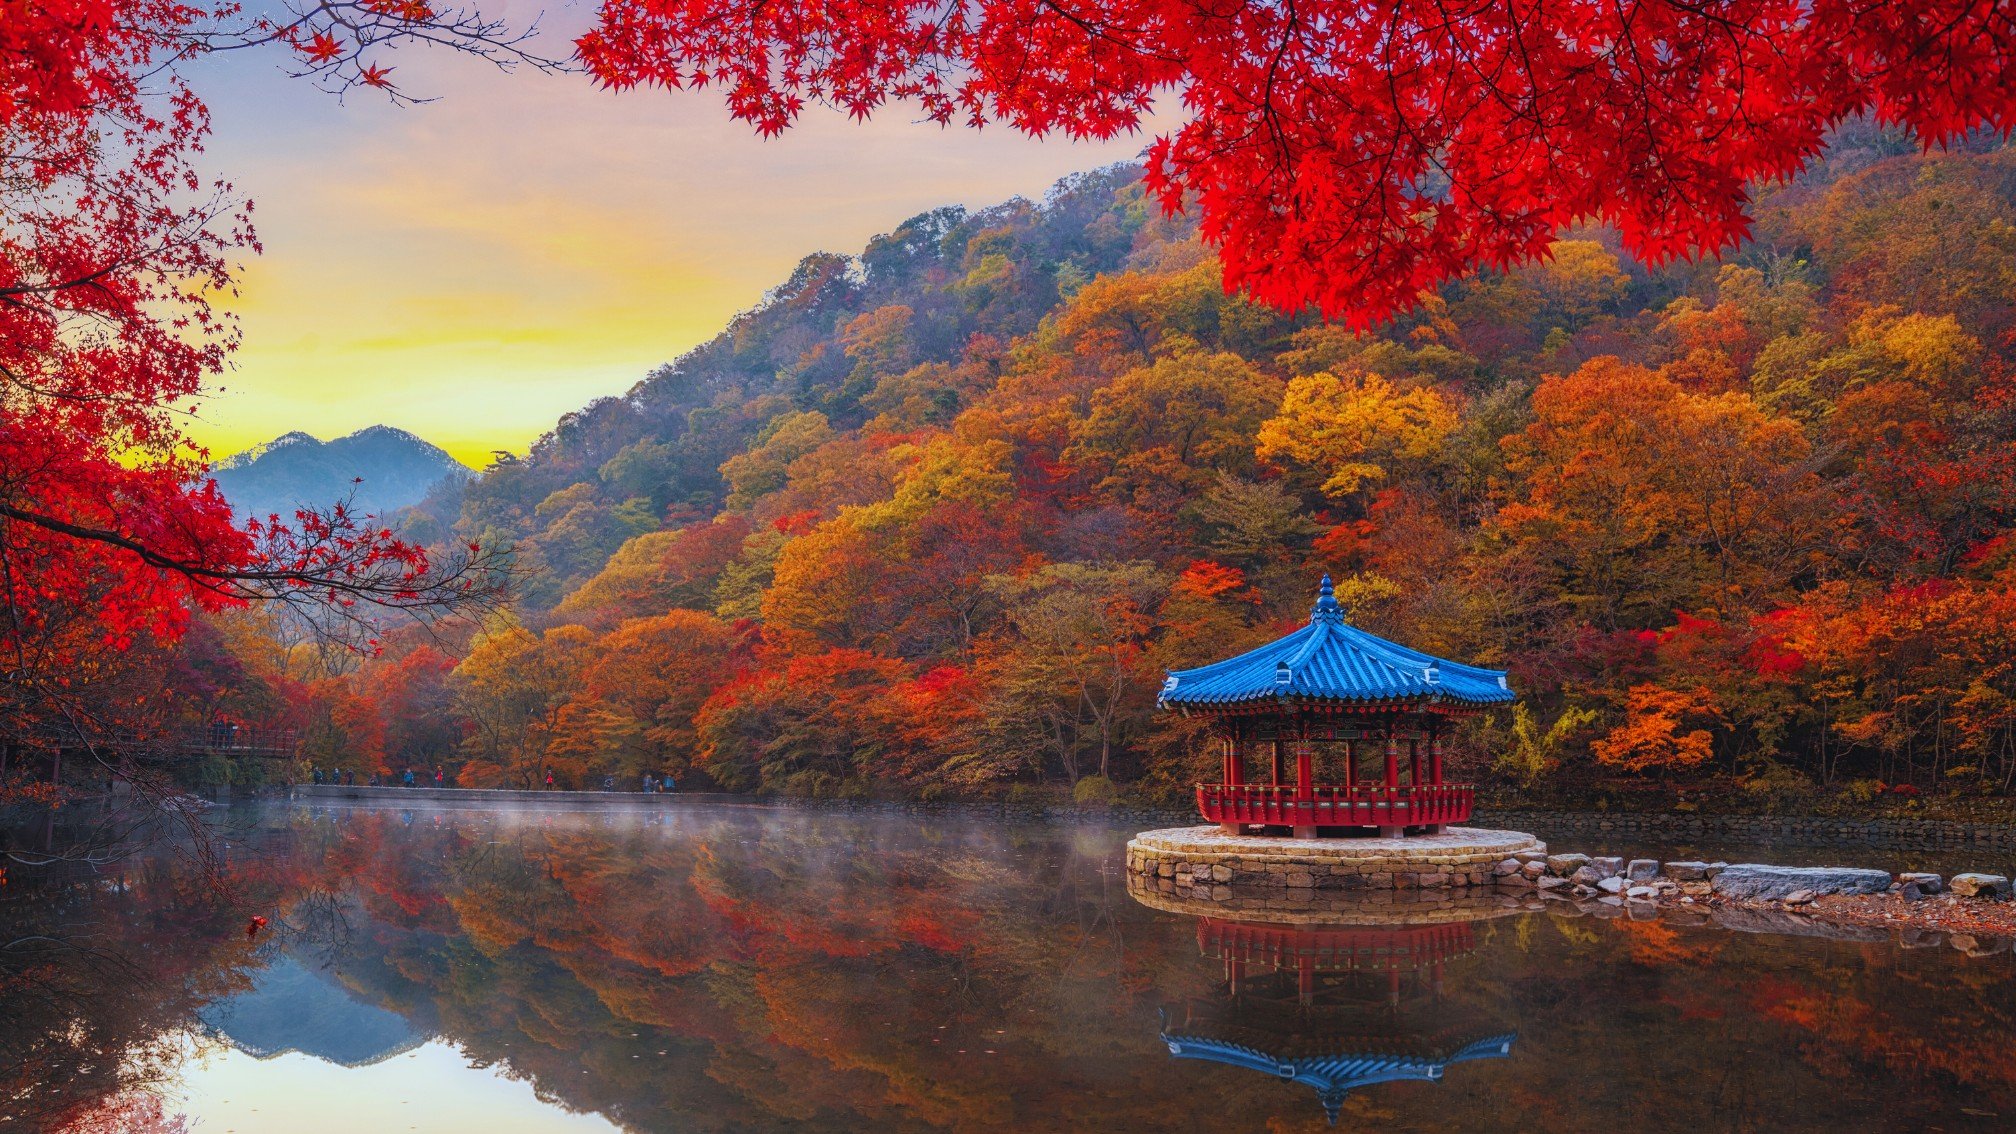 Naejangsan National Park is most famous for its colorful mountains during the Fall season. Hiking trails, cultural heritage, various plants and animals...